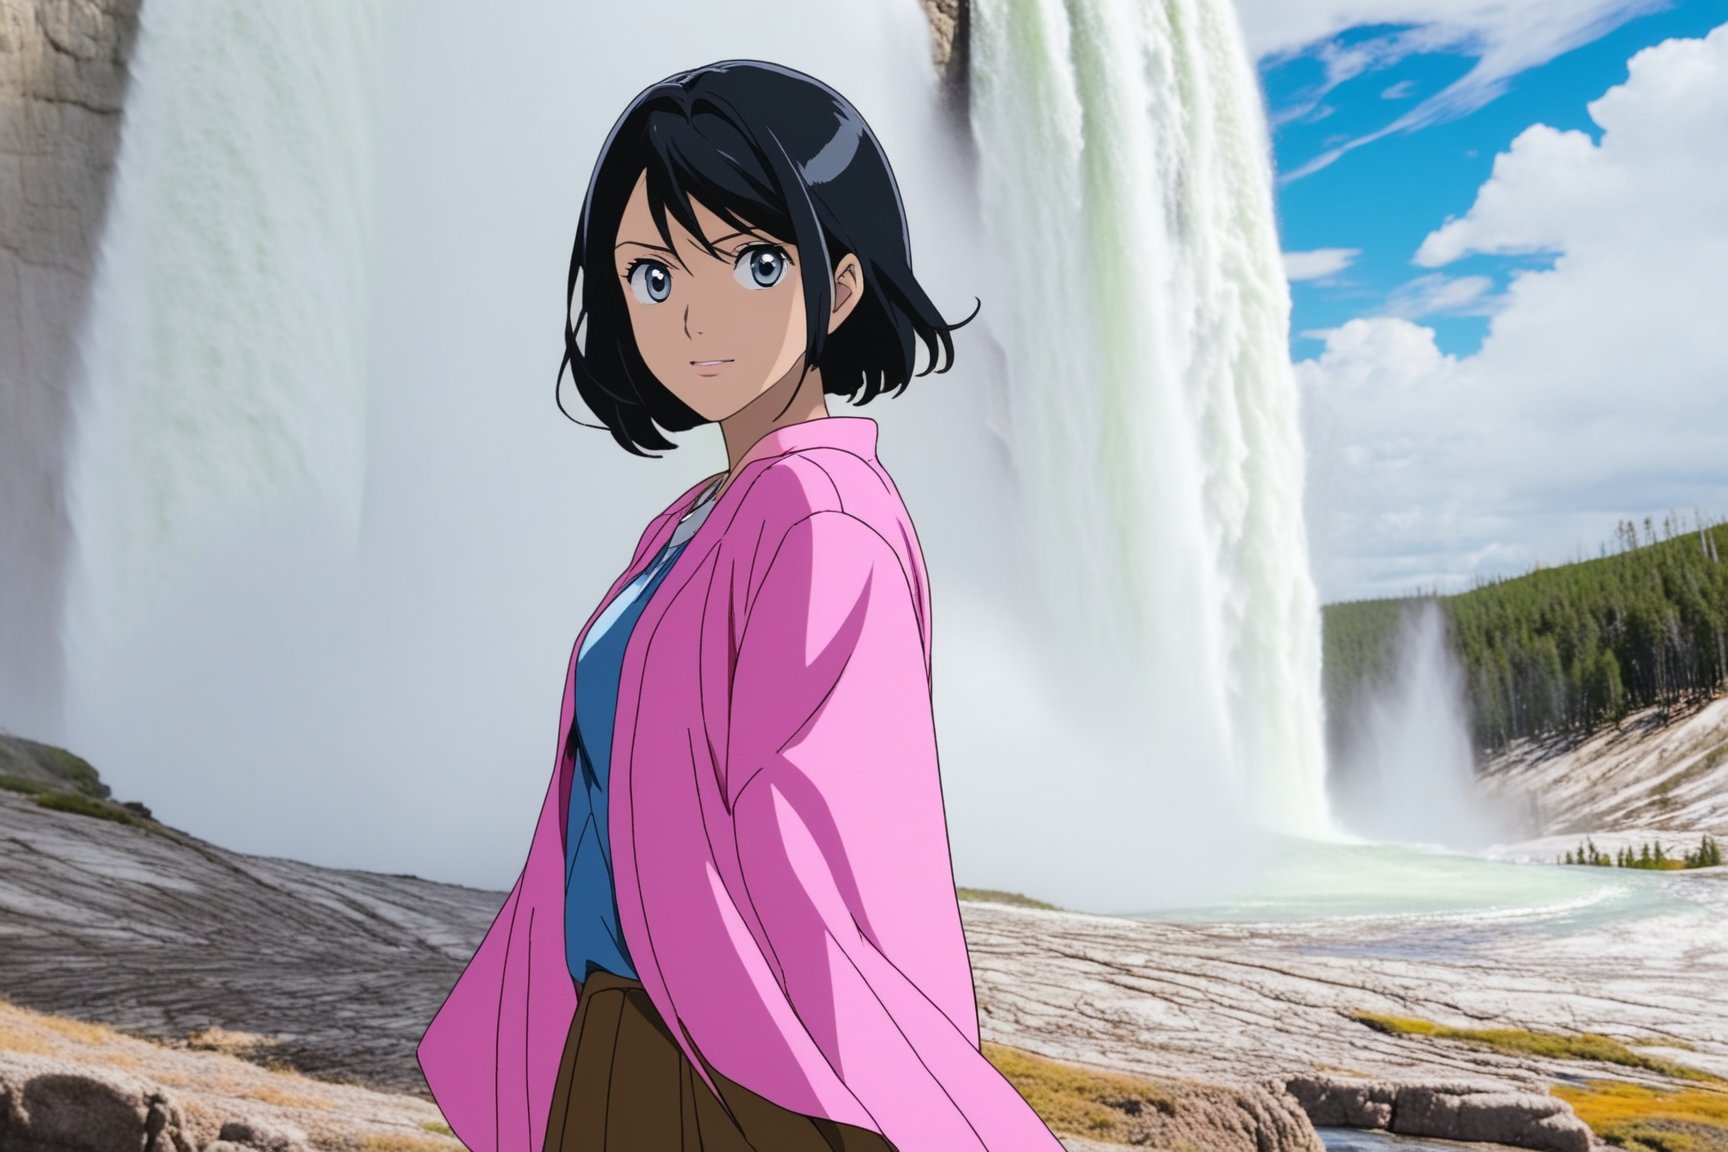 Highly-detailed beautiful girl,20yo,kuchiki rukia\(bleach\),taking selfie of Old Faithful of Yellowstone,highly-detailed exquisite face,soft shiny skin,detailed eyes,perfect female form,hourglass figure,black hair,elegant pink jacket and jean skirt,smile,perfect hands,perfect fingers,vibrant colors,looking at viewer,1girl,solo,dynamic sexy pose,(halfbody shot:1.3),(backdrop: oldfa1thfu1,outdoors,blue sky,tree,scenery,realistic,detailed soil,mostly white soil with some brown),(girl full frame:1.5),(upperbody  close-up shot:1.5)
BREAK
trending on artstation,rule of thirds,perfect composition,cinematic lighting,anime style,ultra-detailed,masterpiece,sharp focus,high contrast,art_booster,ani_booster, photo_b00ster,real_booster,ye11owst0ne